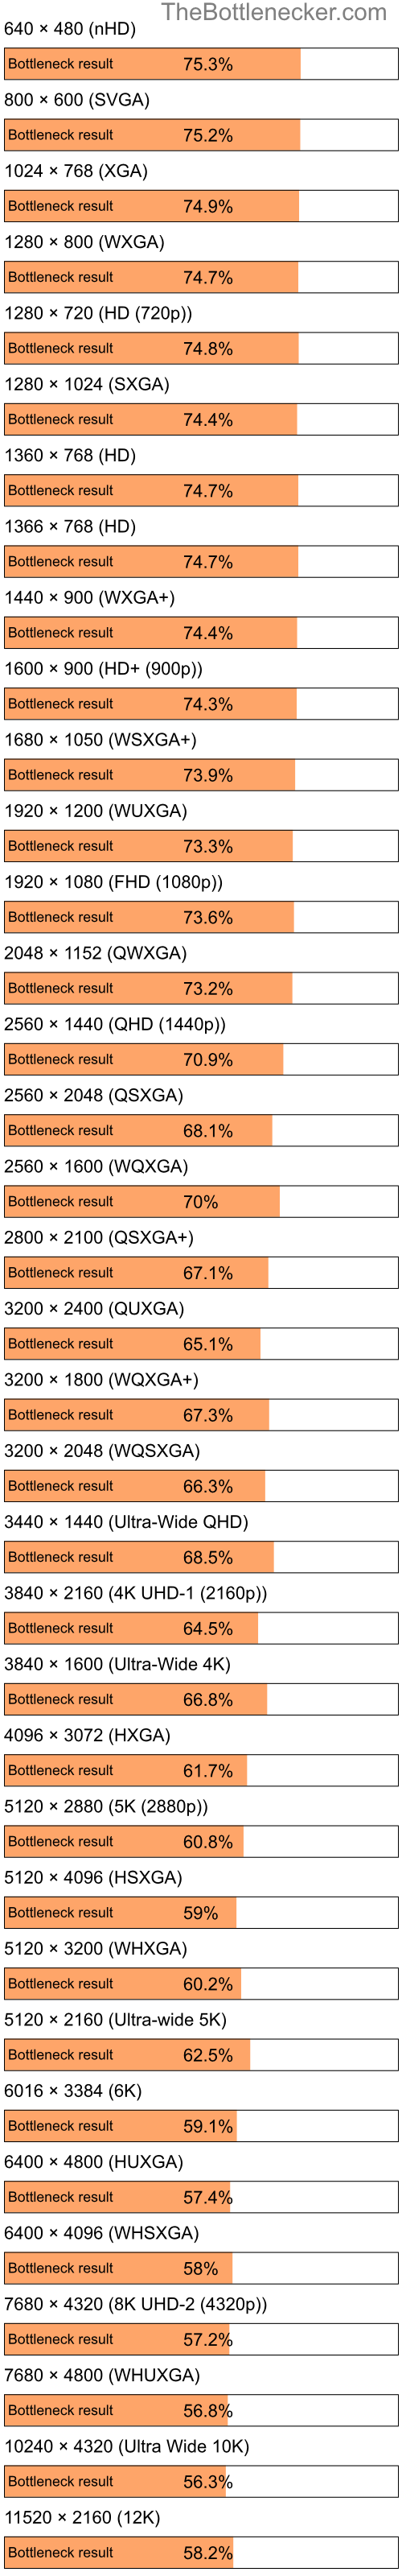 Bottleneck results by resolution for AMD Athlon XP 2000+ and NVIDIA GeForce GTX 1060 in Graphic Card Intense Tasks